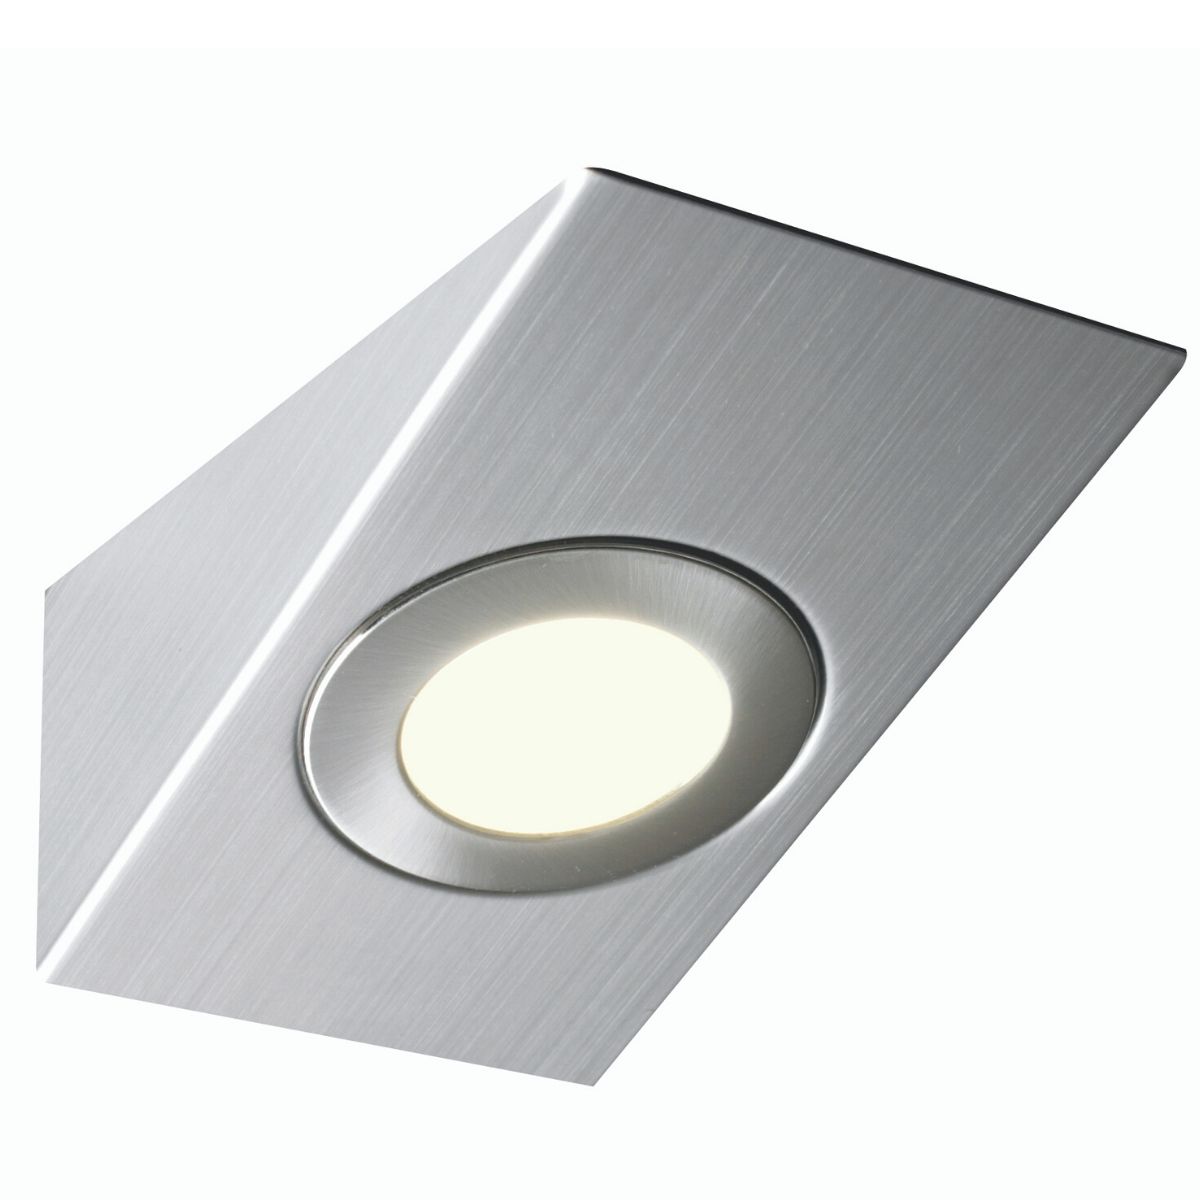 View New Samsung LED Technology Wedge LED UnderCabinet Light Warm WhiteNeutral White information